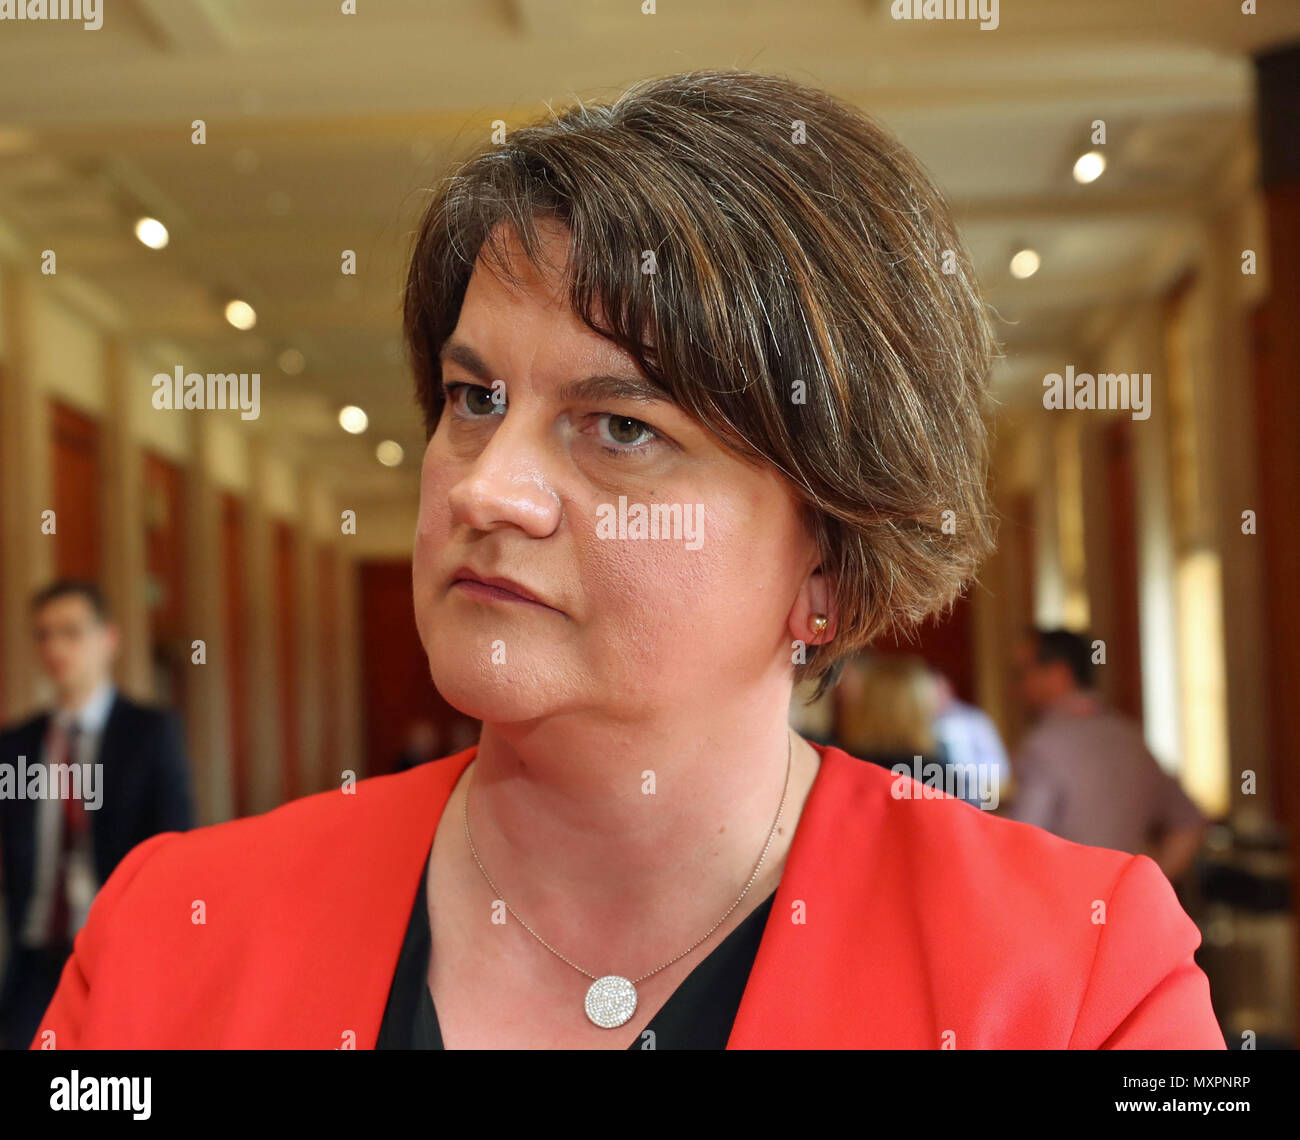 DUP Leader Arlene Foster speaks to the media at Stormont Parliament in Belfast, following her comments at the weekend about the party&acirc;€™s &quot;red line&quot; on customs arrangements post-Brexit, which were interpreted by some as a veiled threat to pull the plug on her party's confidence and supply deal with the Tories. Stock Photo